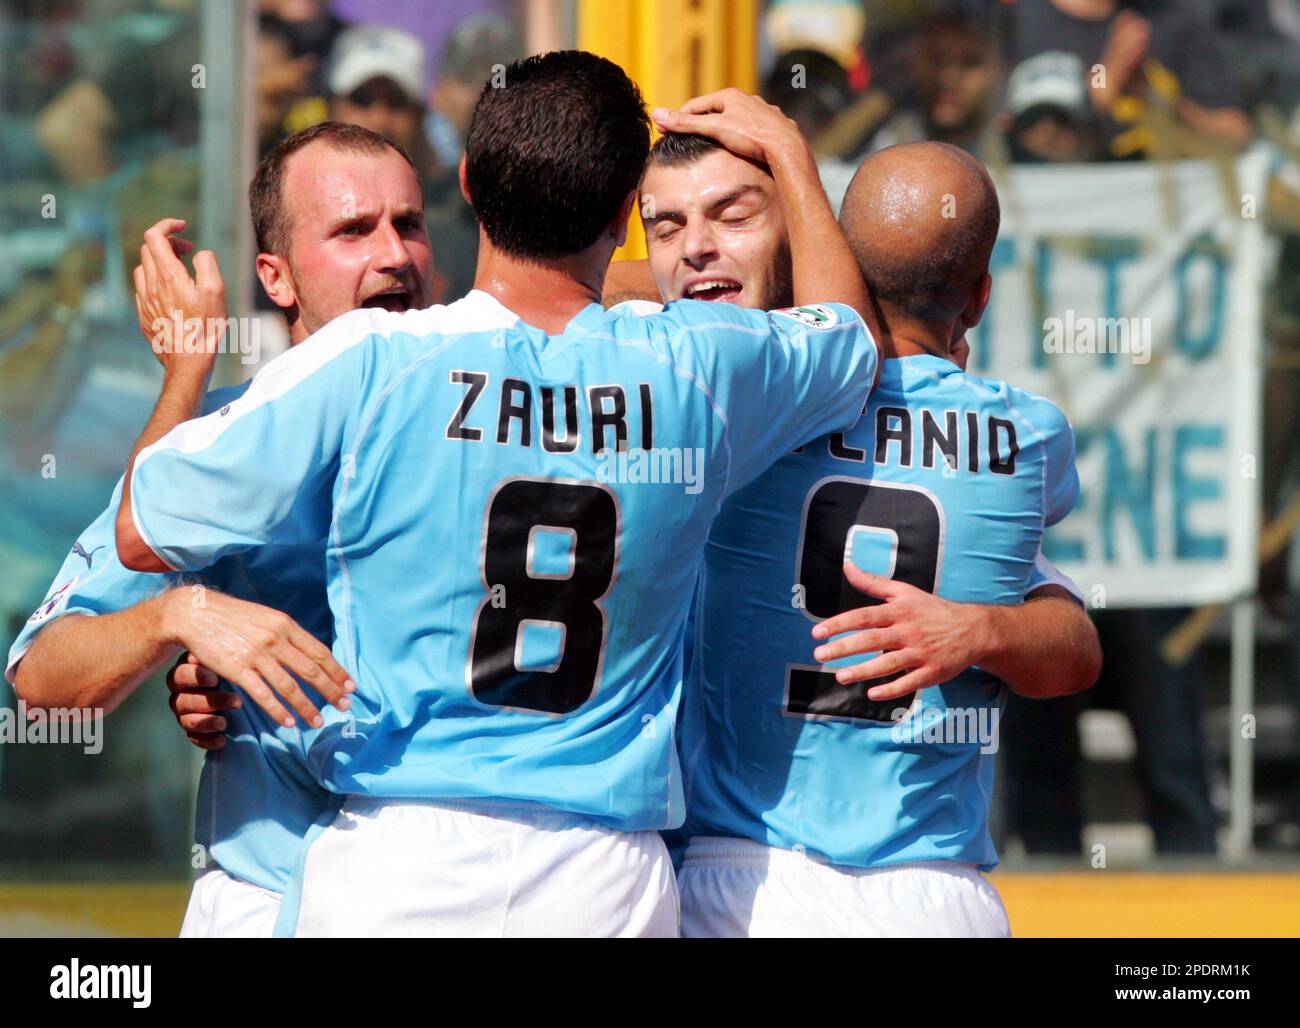 Lazio players cheer after scoring during the Italian Serie A